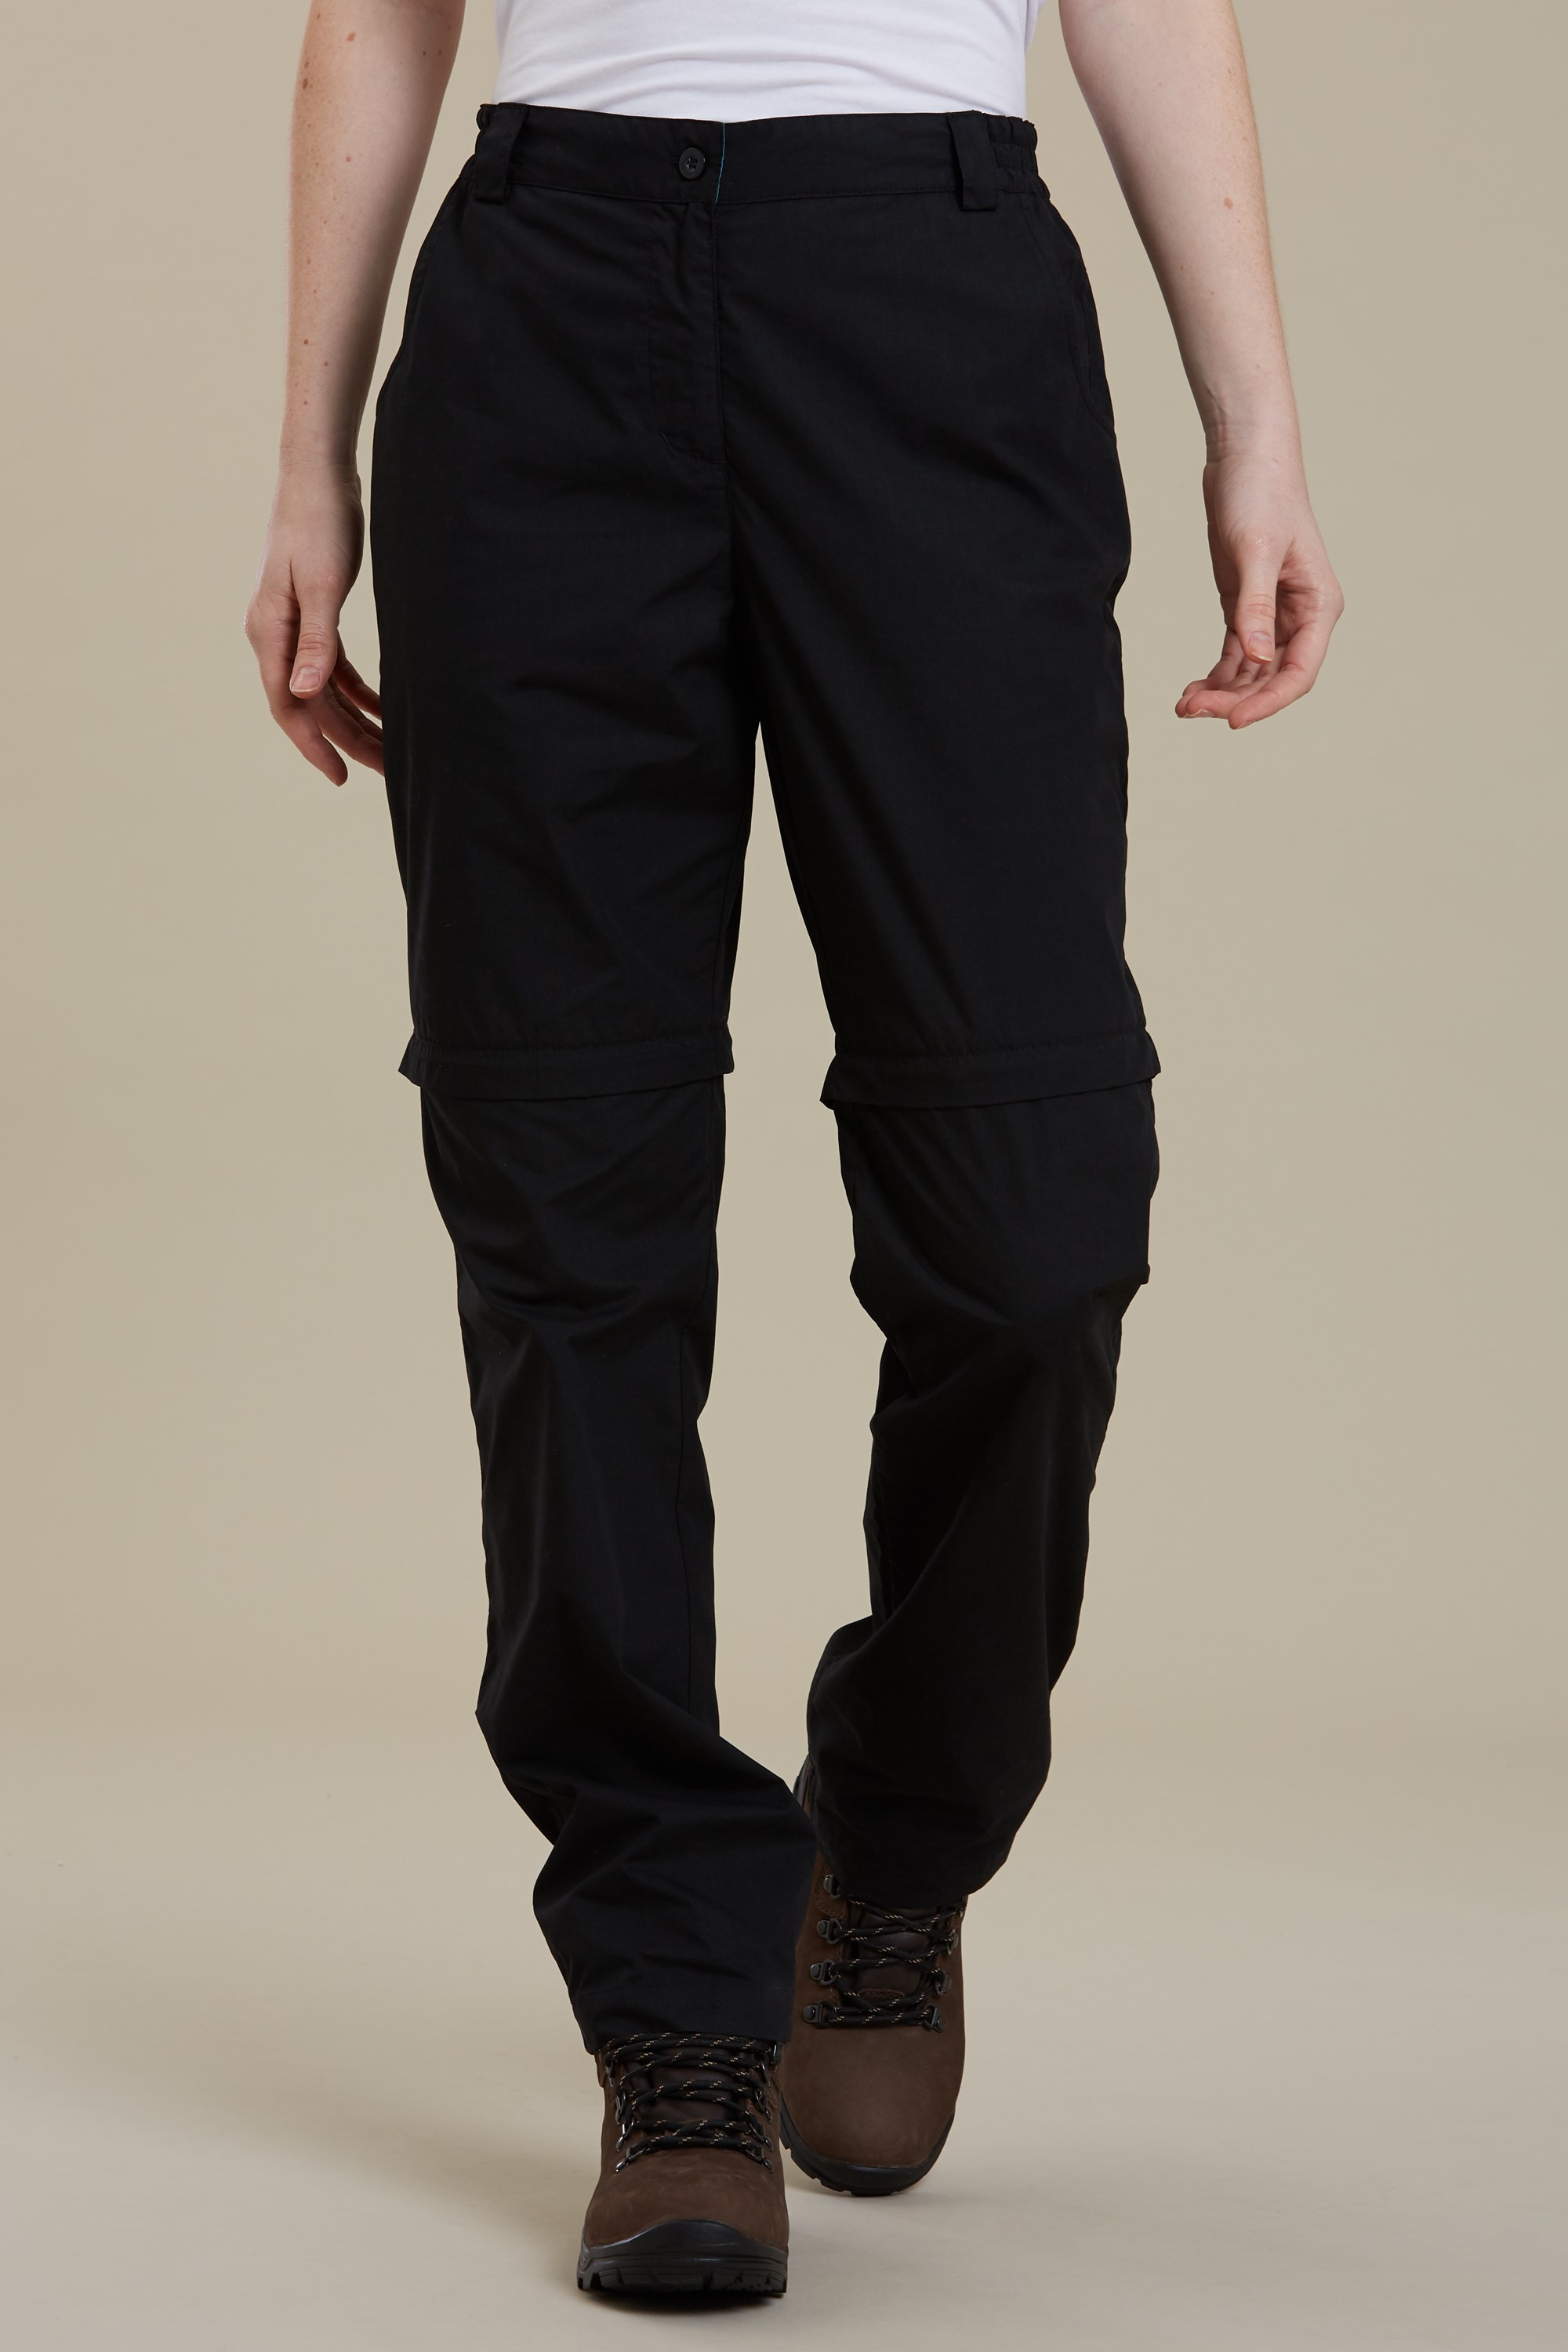 11 Best Convertible Pants You Can Zip On and Off in 2023 | Well+Good